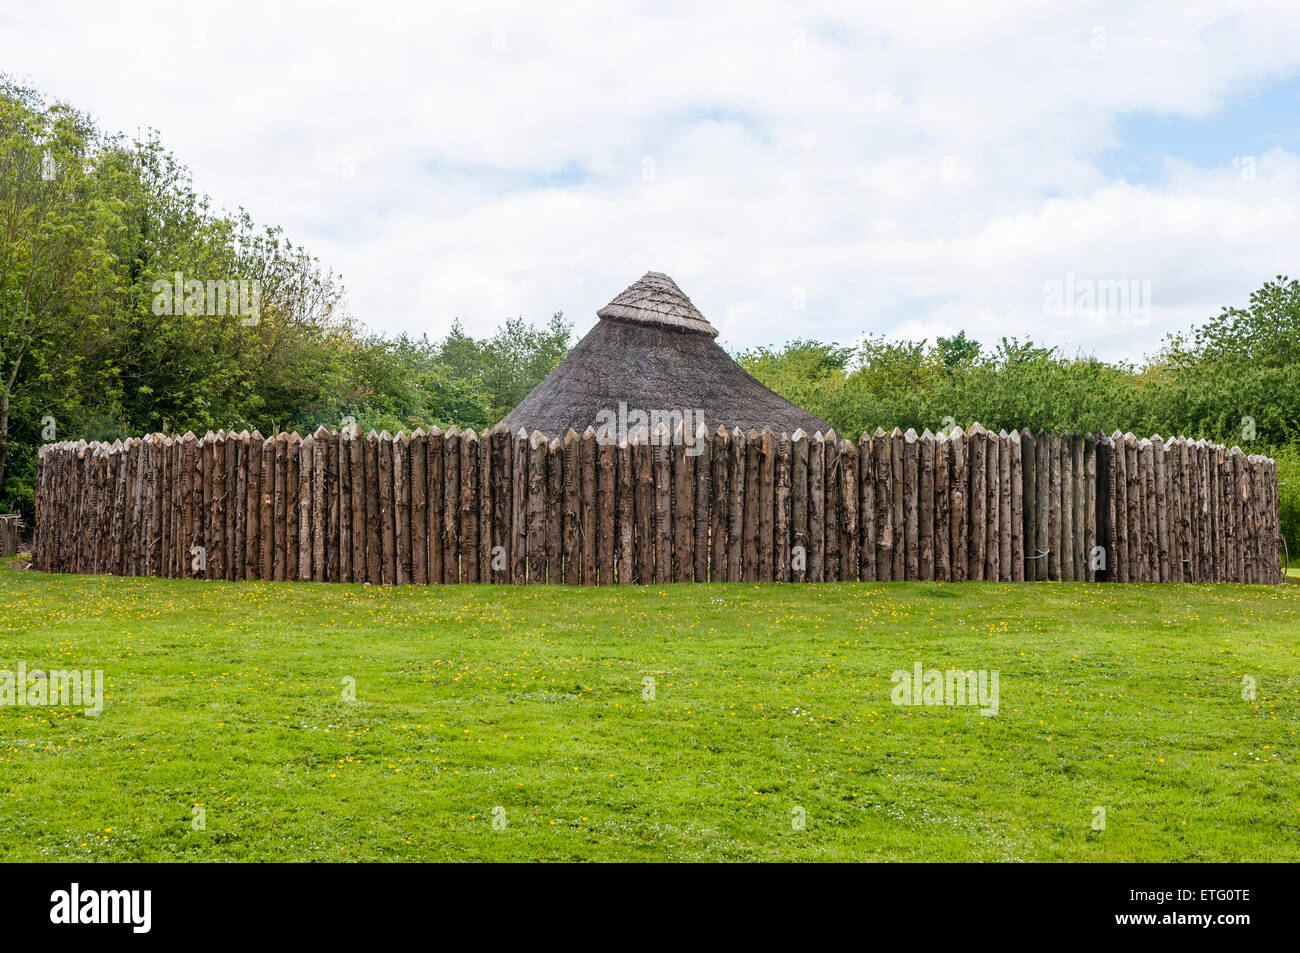 A replica iron-age dwelling, made from willow, hazel and thatch, sits behind a protective fence Stock Photo